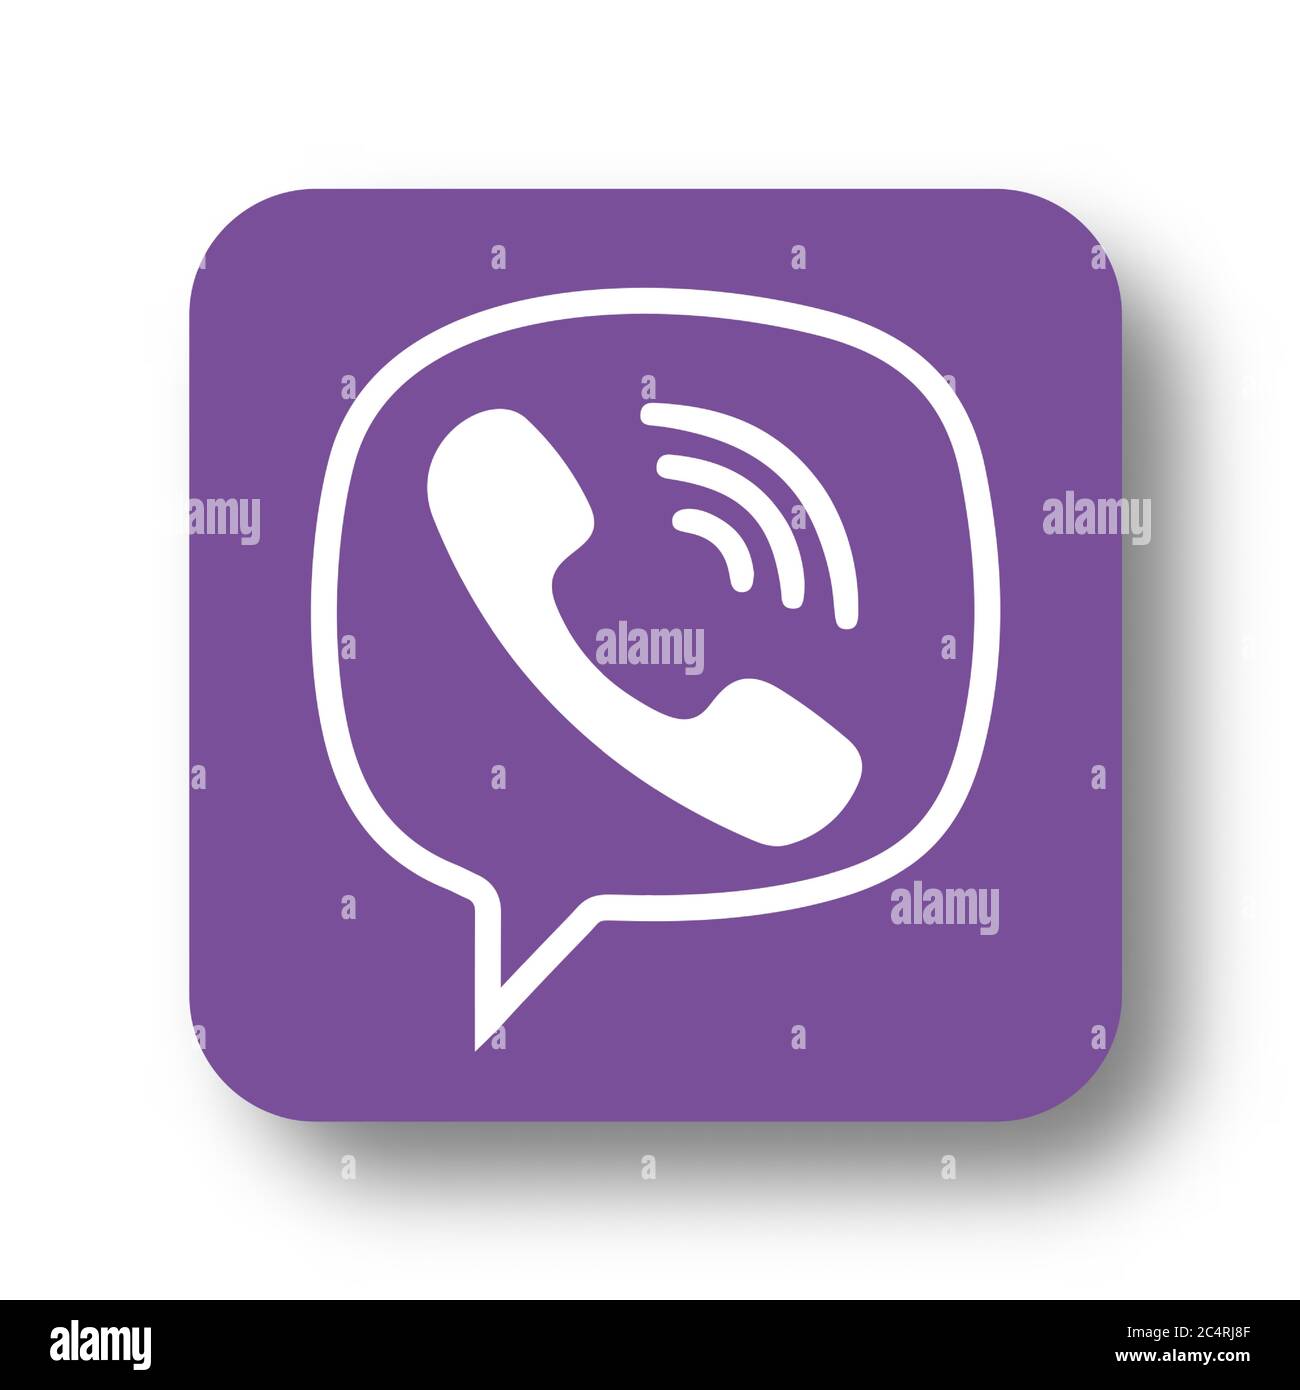 VORONEZH, RUSSIA - JANUARY 31, 2020: Viber logo purple square icon with soft shadow Stock Vector